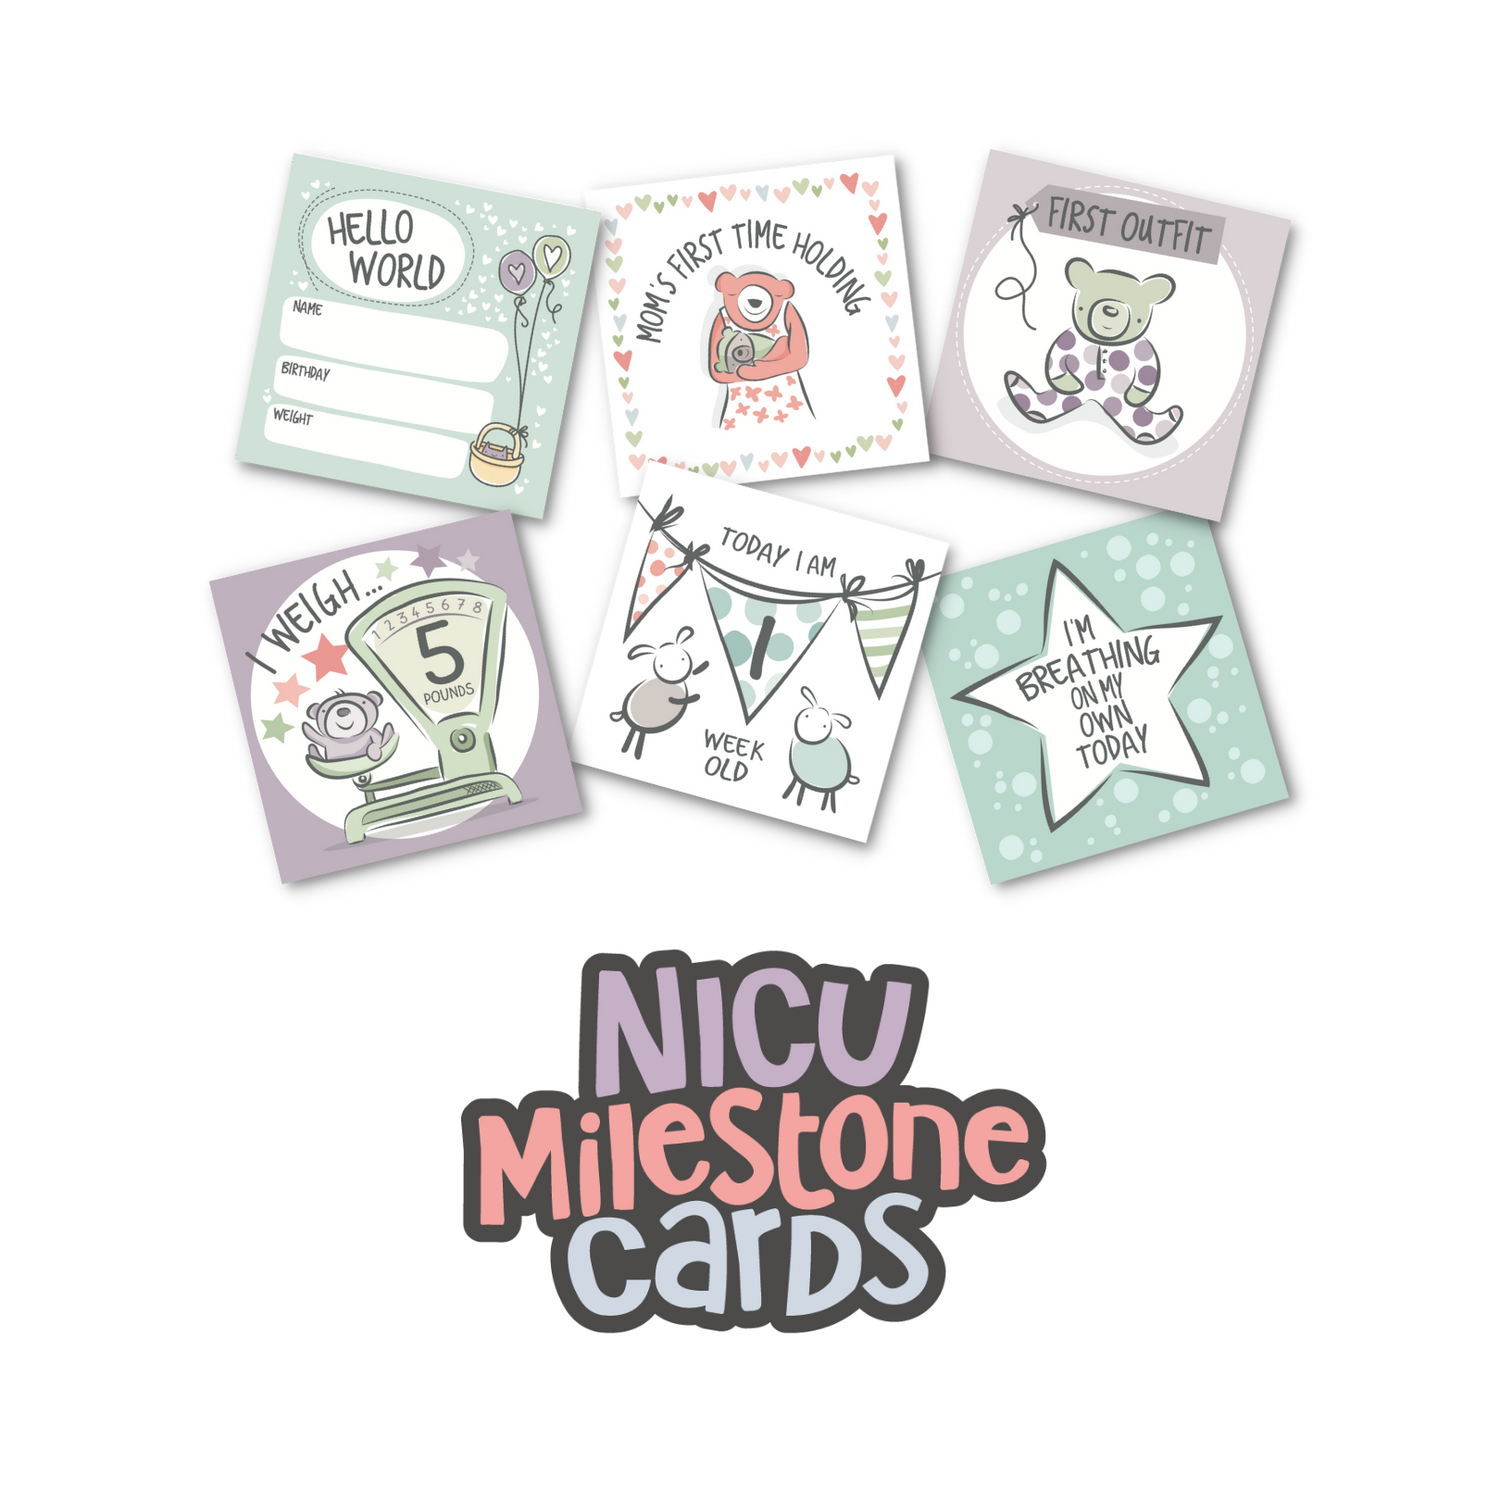 NICU Milestone cards or photo cards to celebrate a preemie or NICU baby accomplishments like gaining weight or being off oxygen or mom's first time holding or baby's first outfit in the NICU. Shop for NICU photo cards by clicking this image.  